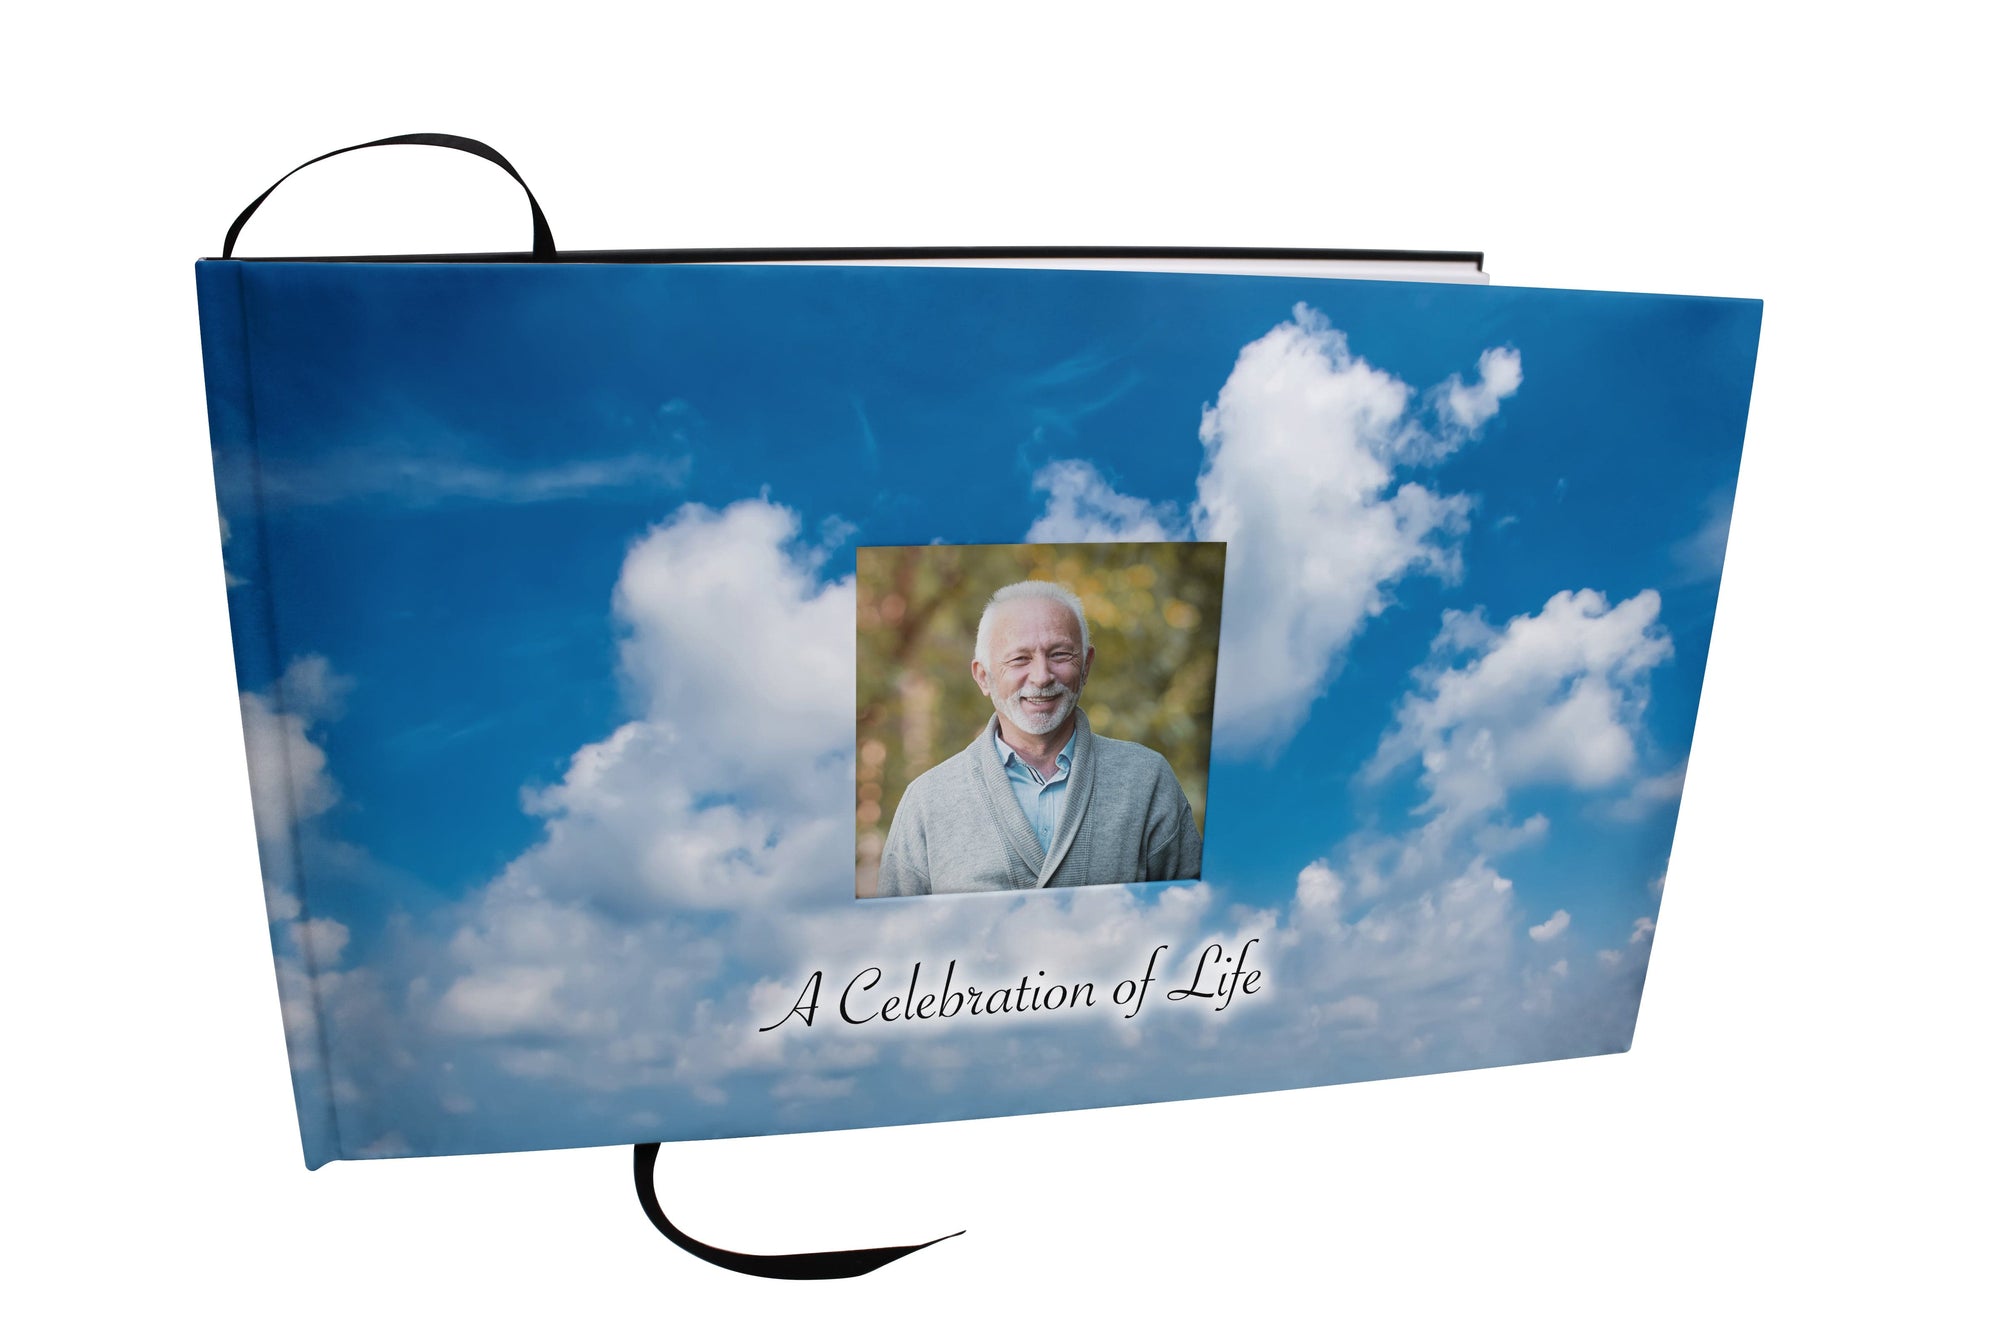 Commemorative Cremation Urns Heavenly Clouds Matching Themed 'Celebration of Life' Guest Book for Funeral or Memorial Service